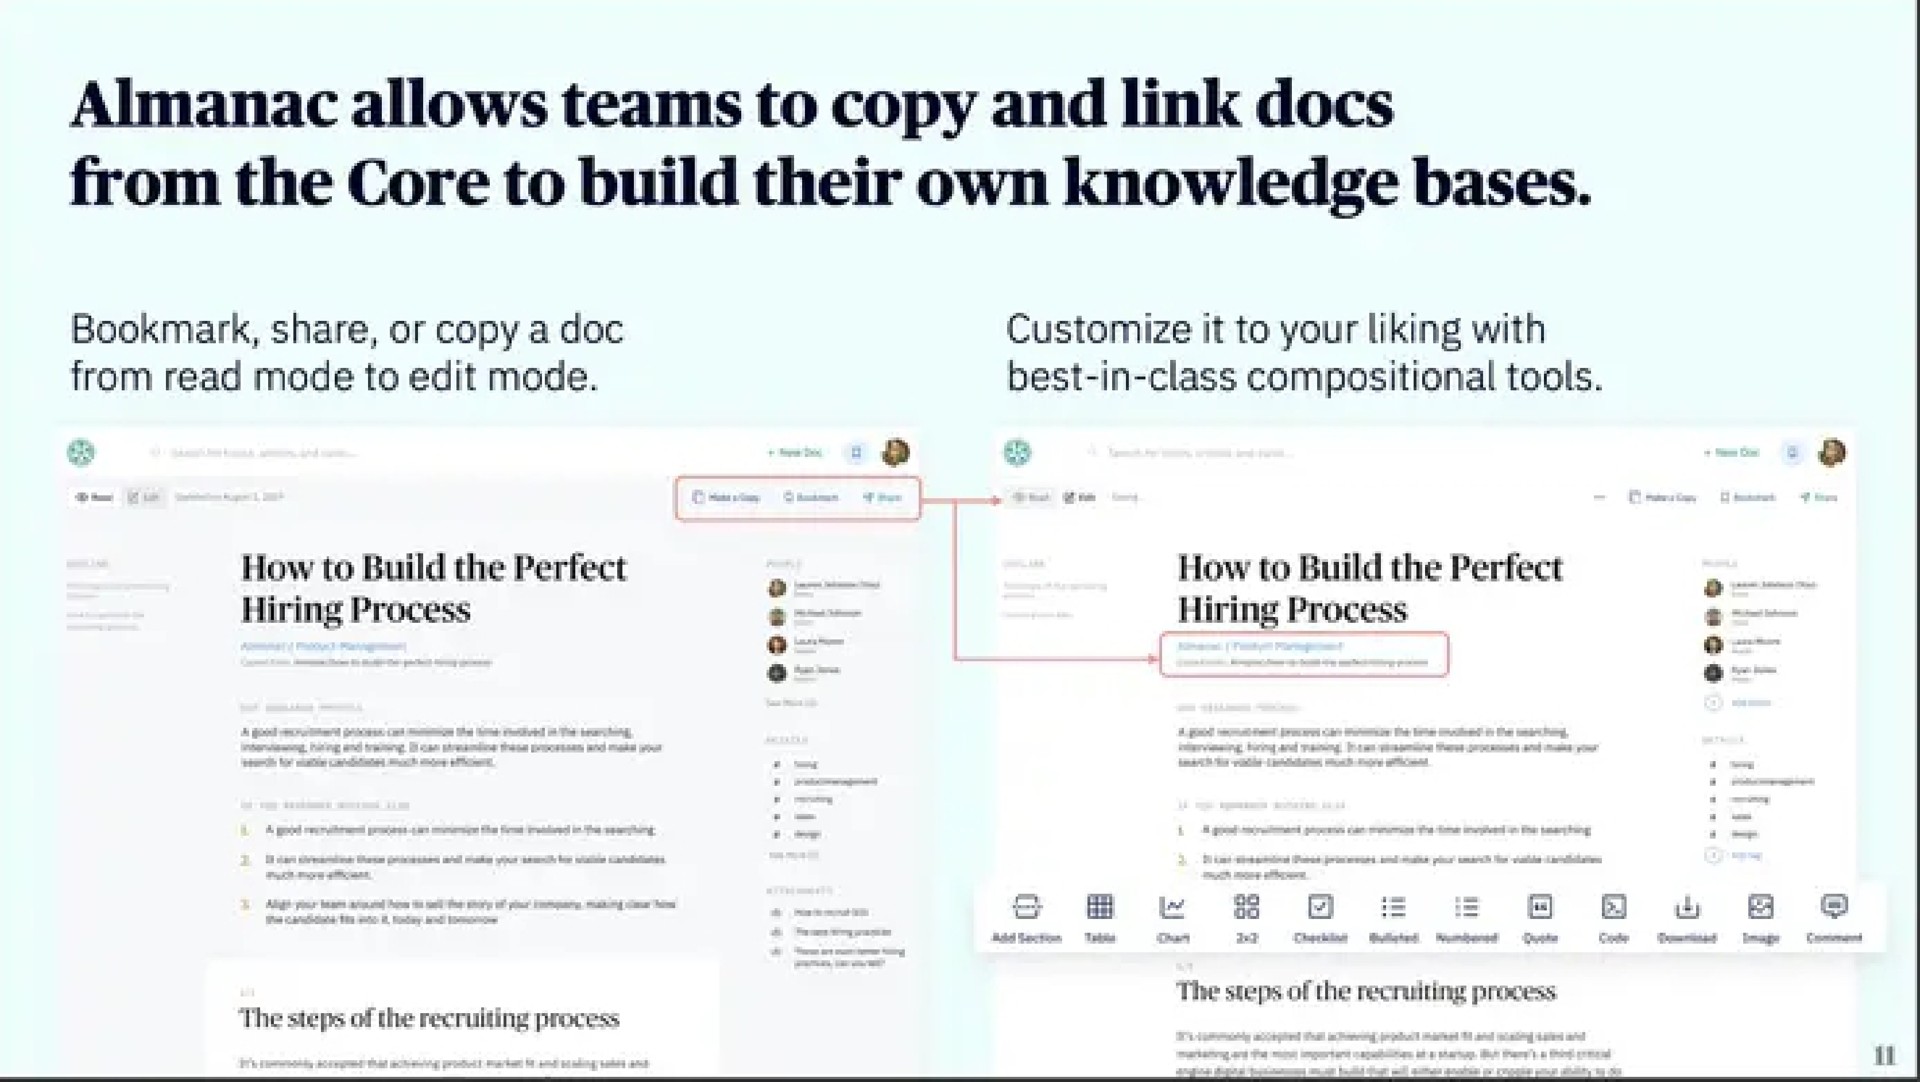 almanac allows teams to copy and link docs from the core to build their own knowledge bases | Almanac